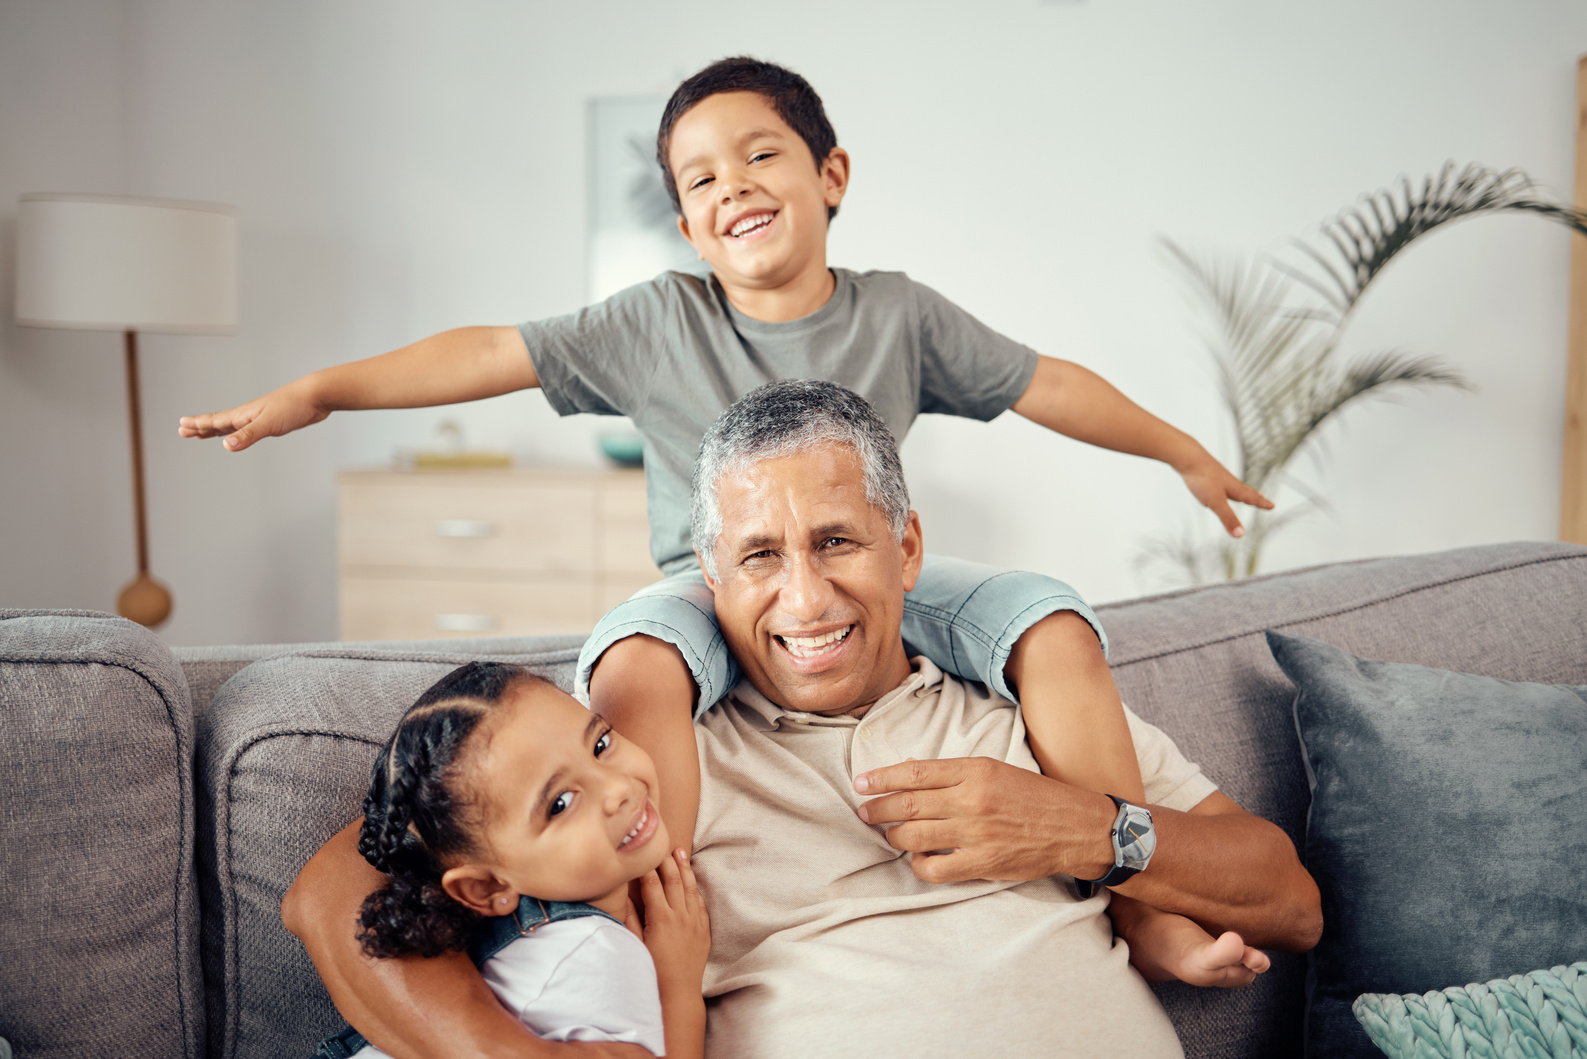 Grandkids, Grandpa and Play Together in Living Room for Love, Care and Relax in  Home. Portrait of Happy Children, Smile Senior Grandparent and Bonding, Laughing and Enjoying Funny Quality Time